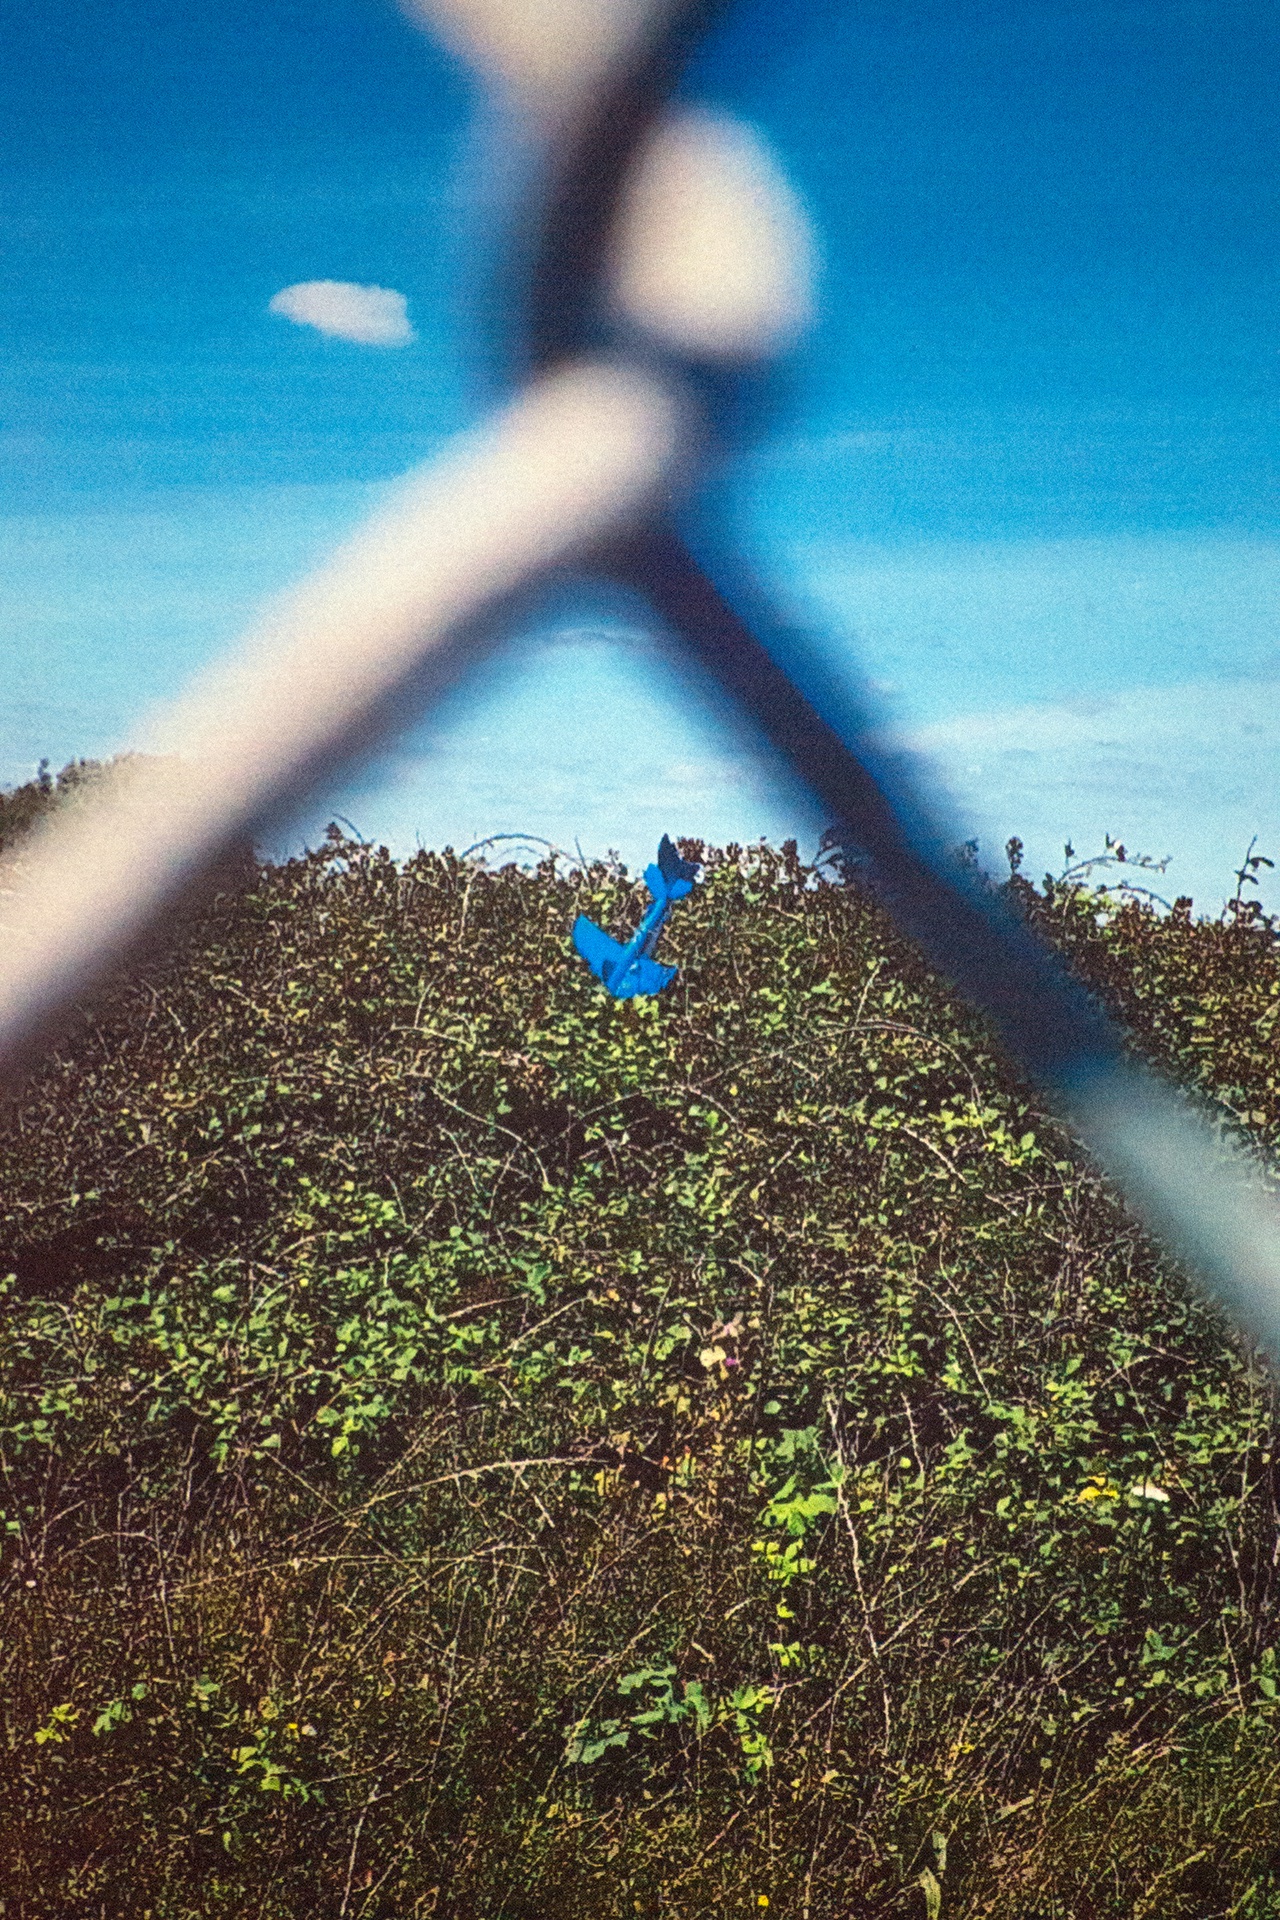 archive photograph, of a blue toy plane ditched into a bush behind a wire fence, under a clear blue sky.